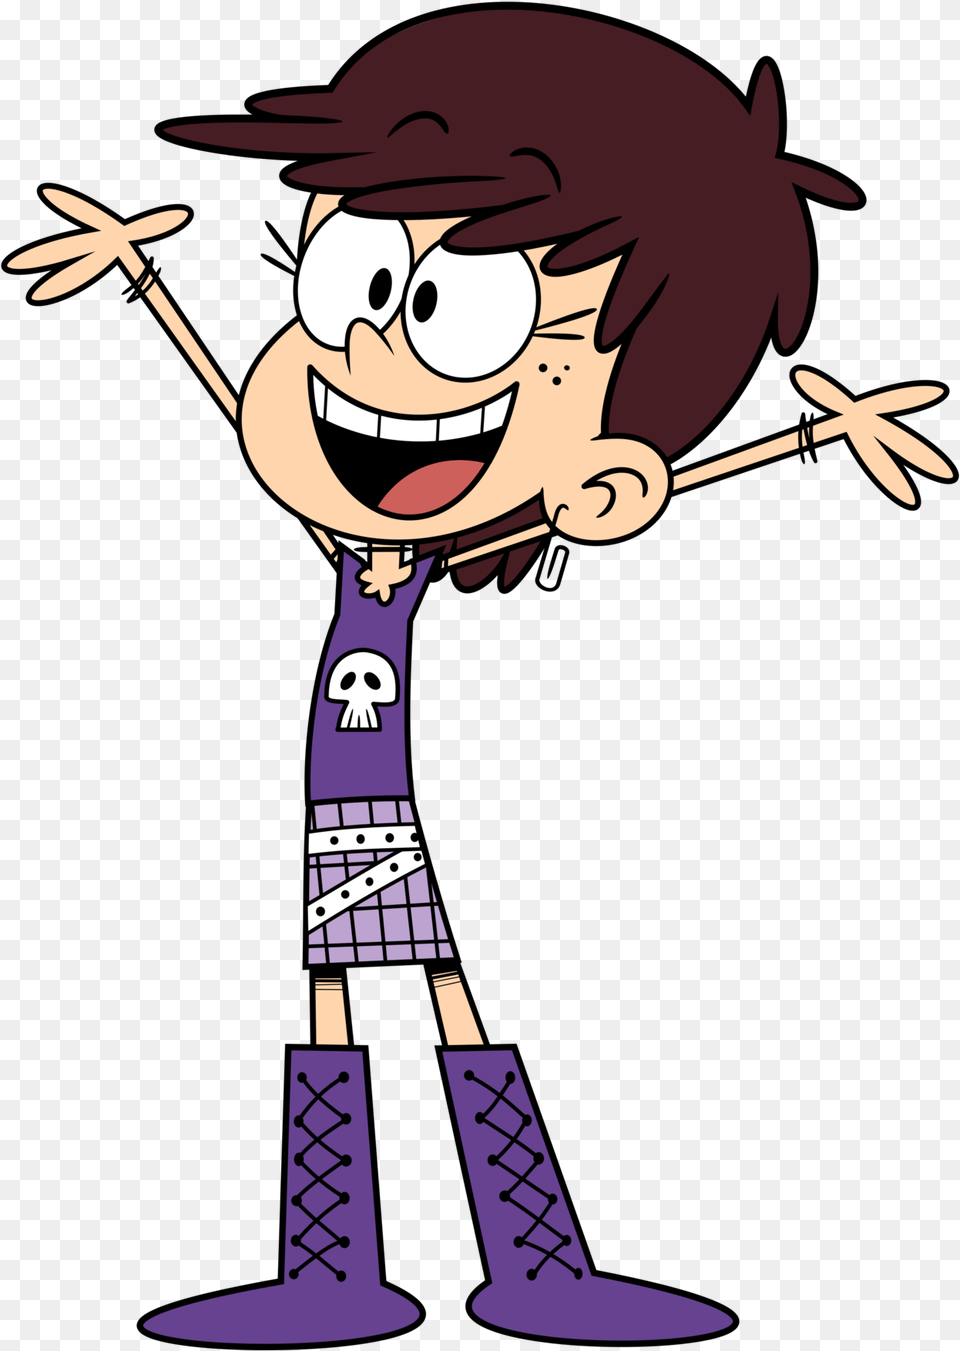 Image Result For The Loud House Season Luna From The Loud House, Cartoon, Book, Comics, Publication Free Transparent Png